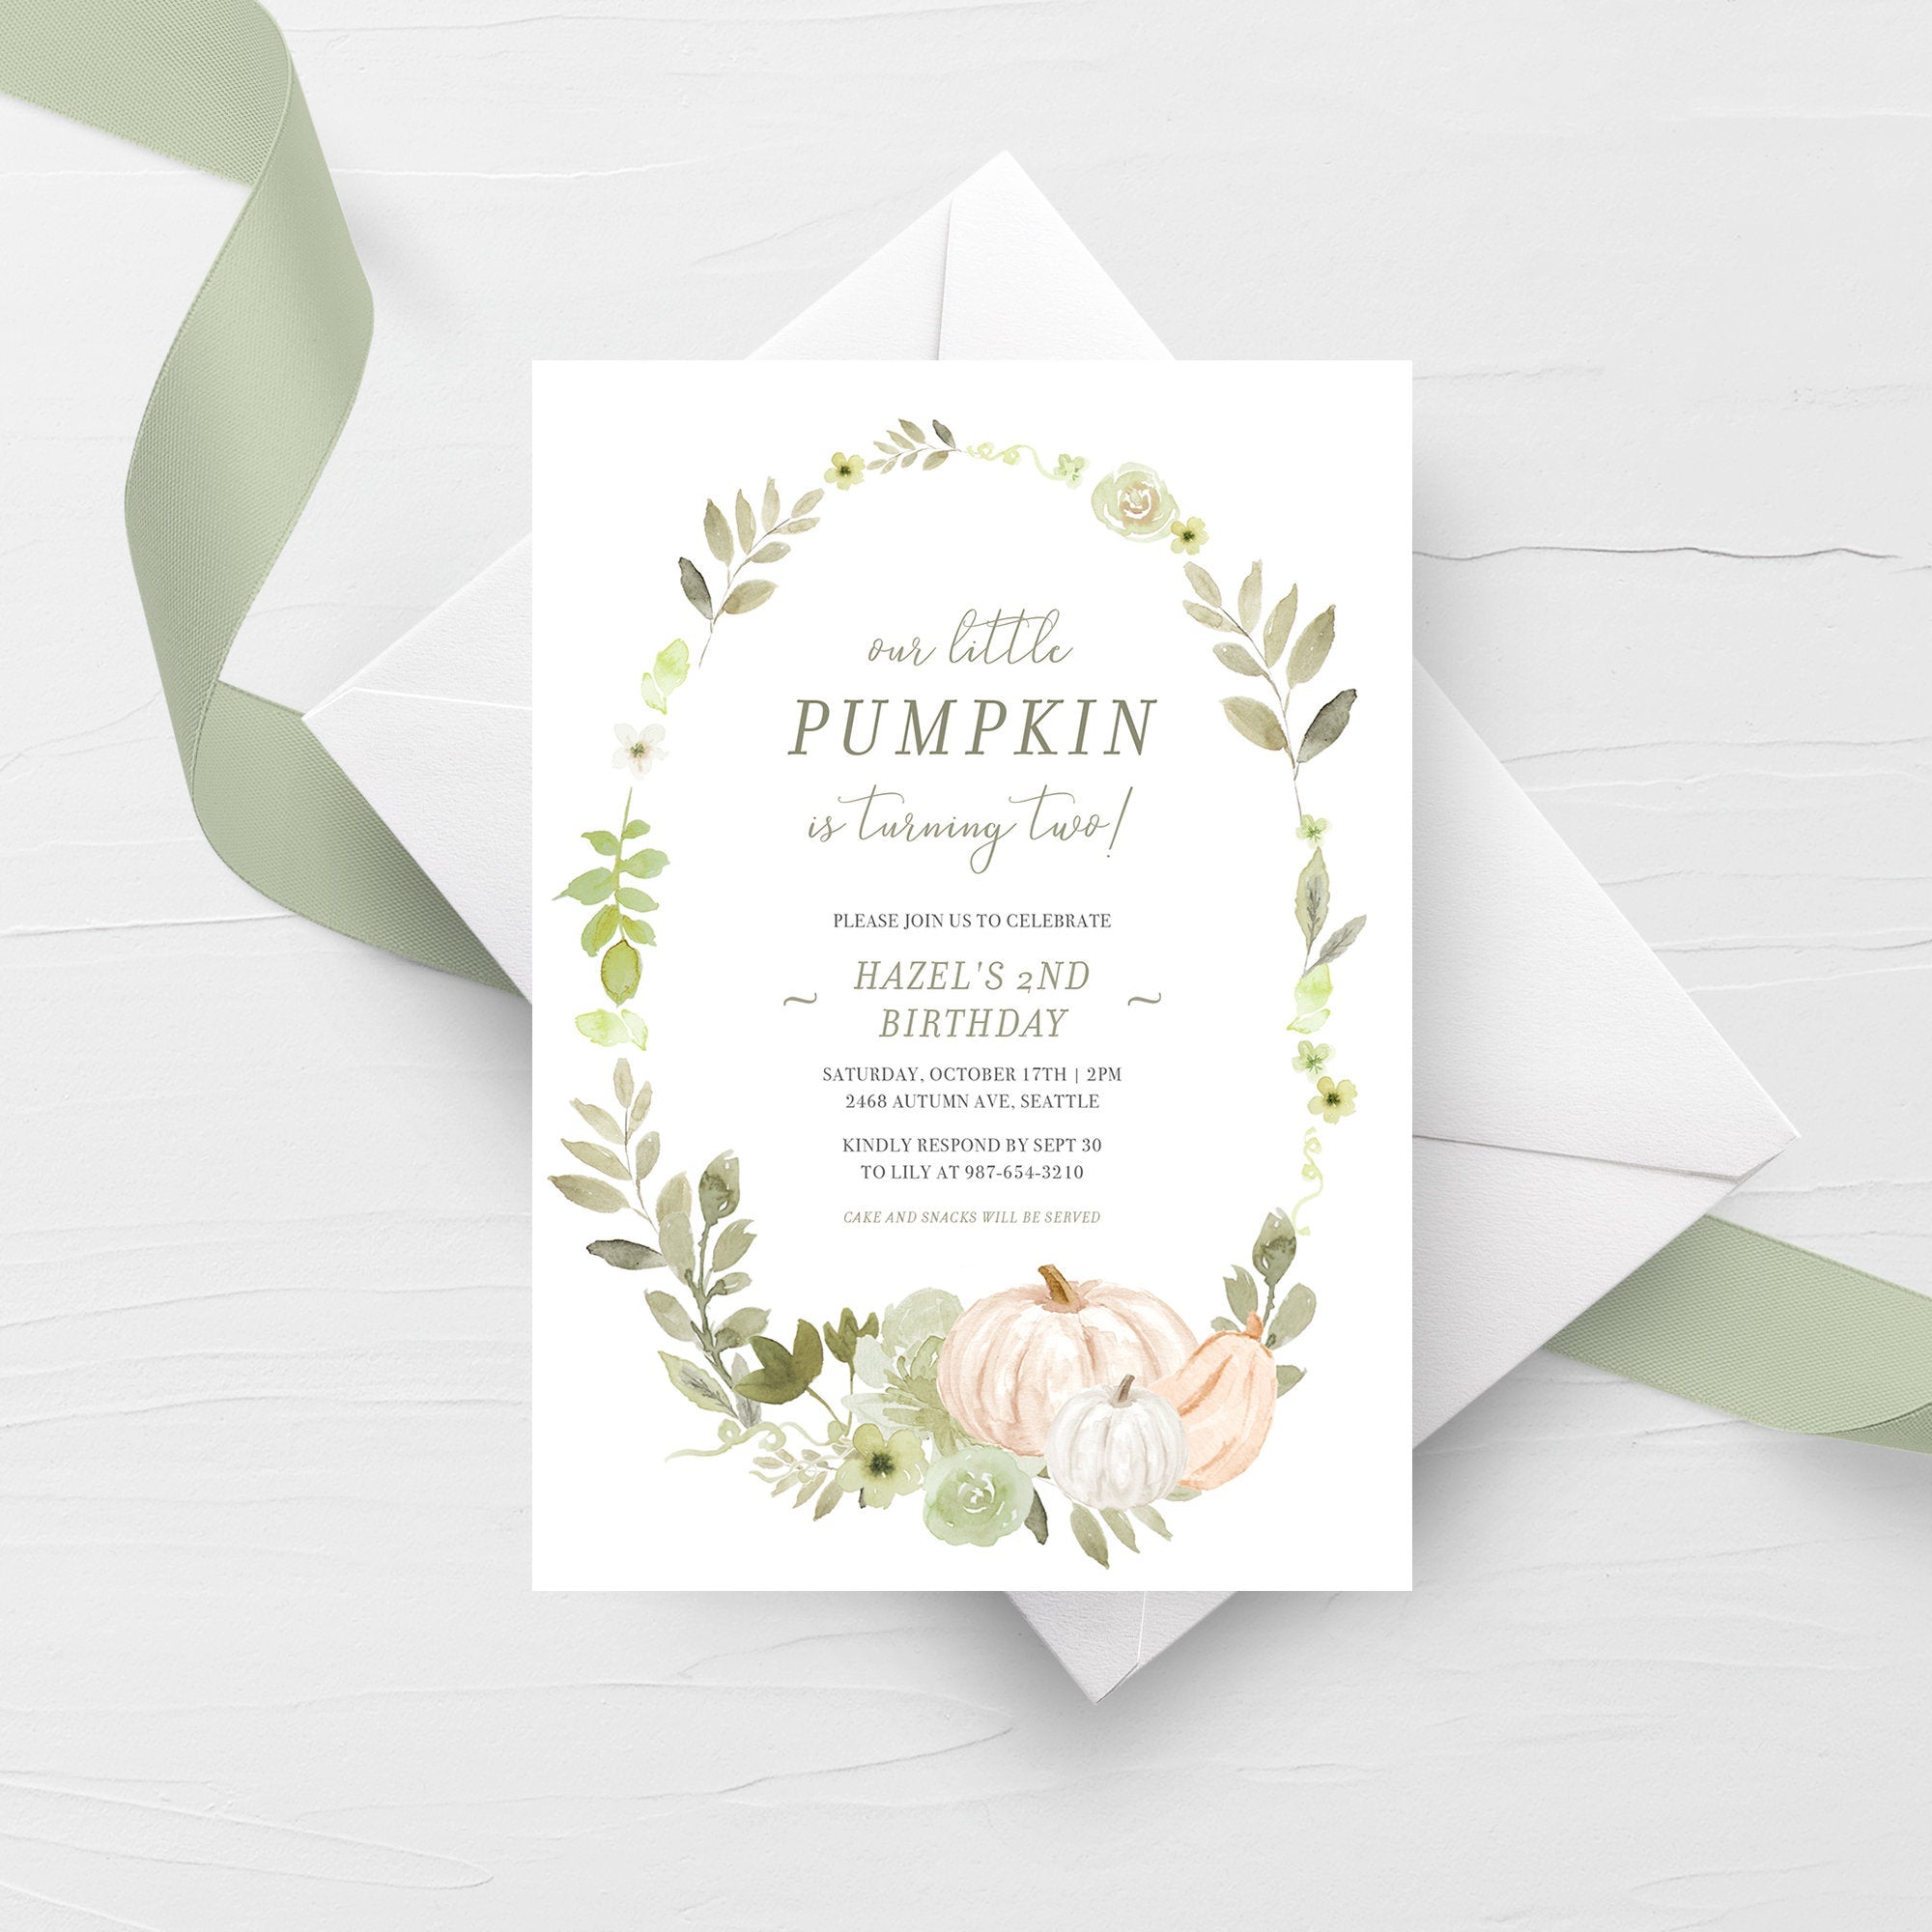 Pumpkin 2nd Birthday Invitation Printable Template, Our Little Pumpkin Is Turning Two, Fall Second Birthday Invite, INSTANT DOWNLOAD PG100